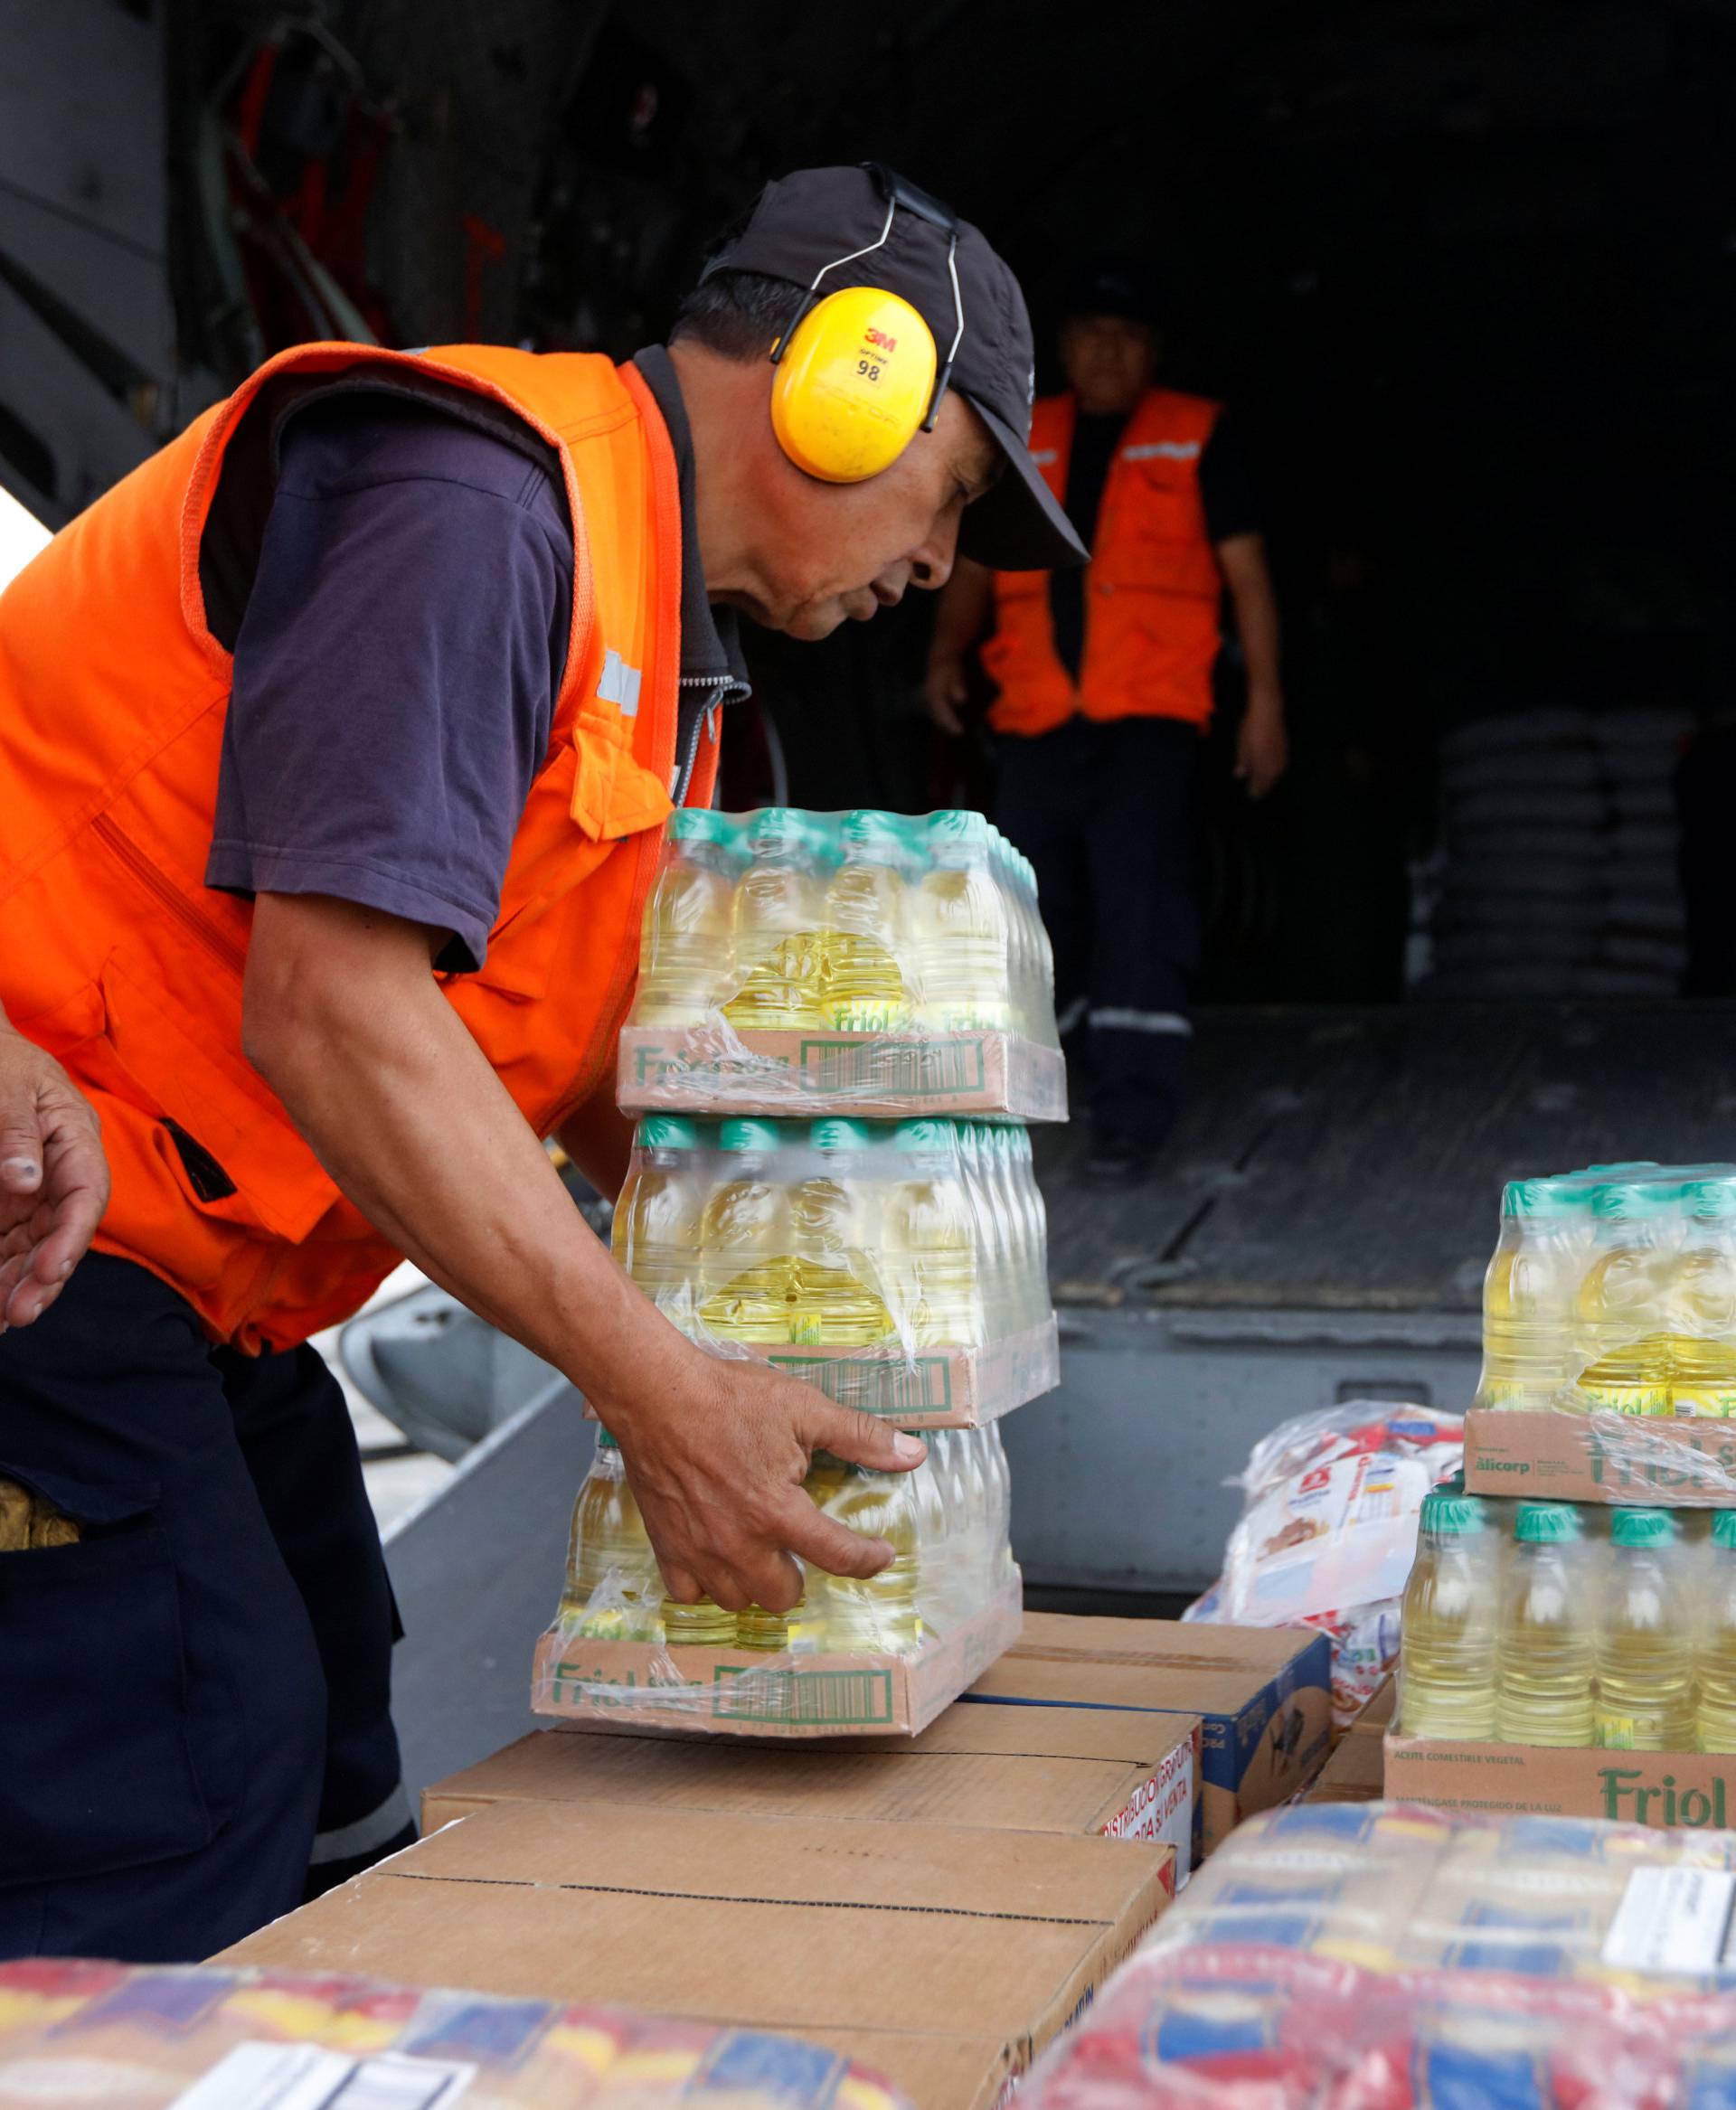 Members of Peru's National Institute of Civil Defense and Peru's Air Force load a cargo plane with aid to be delivered to the Caylloma province of the Andean region Arequipa after a 5.3 magnitude shallow earthquake rocked the region, in Lima